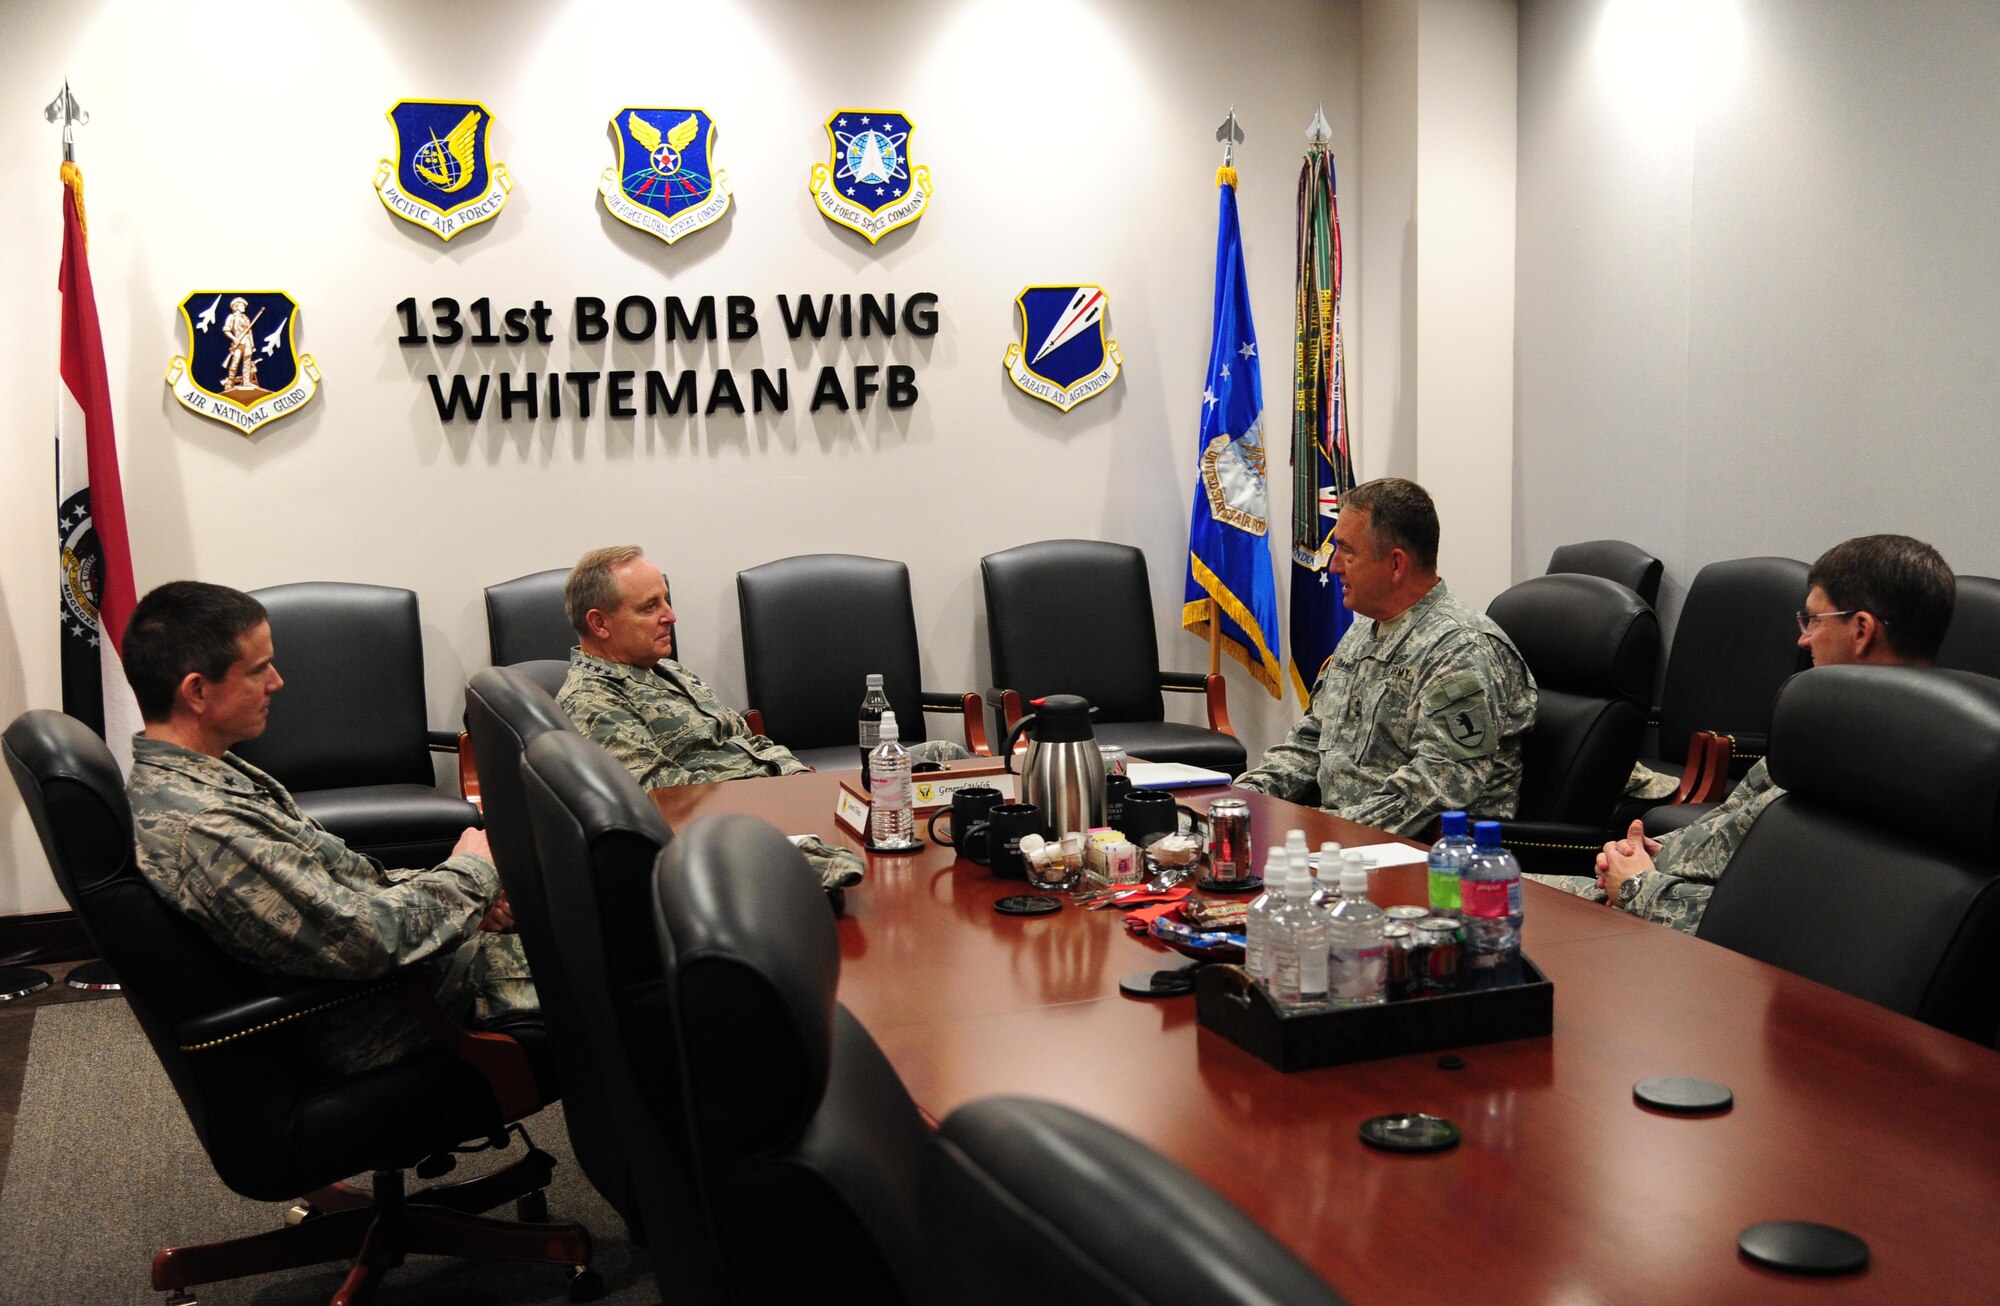 Air Force Chief of Staff Gen. Mark A. Welsh III, left center, speaks to Maj. Gen. Steve Danner, adjutant general of the Missouri National Guard, right center, during a visit at Whiteman Air Force Base, Mo., Feb. 17, 2016. Welsh met with Danner and base leadership to speak about the evolution of Total Force Integration and modernizing for the future. (U.S. Air Force photo by Senior Airman Joel Pfiester)